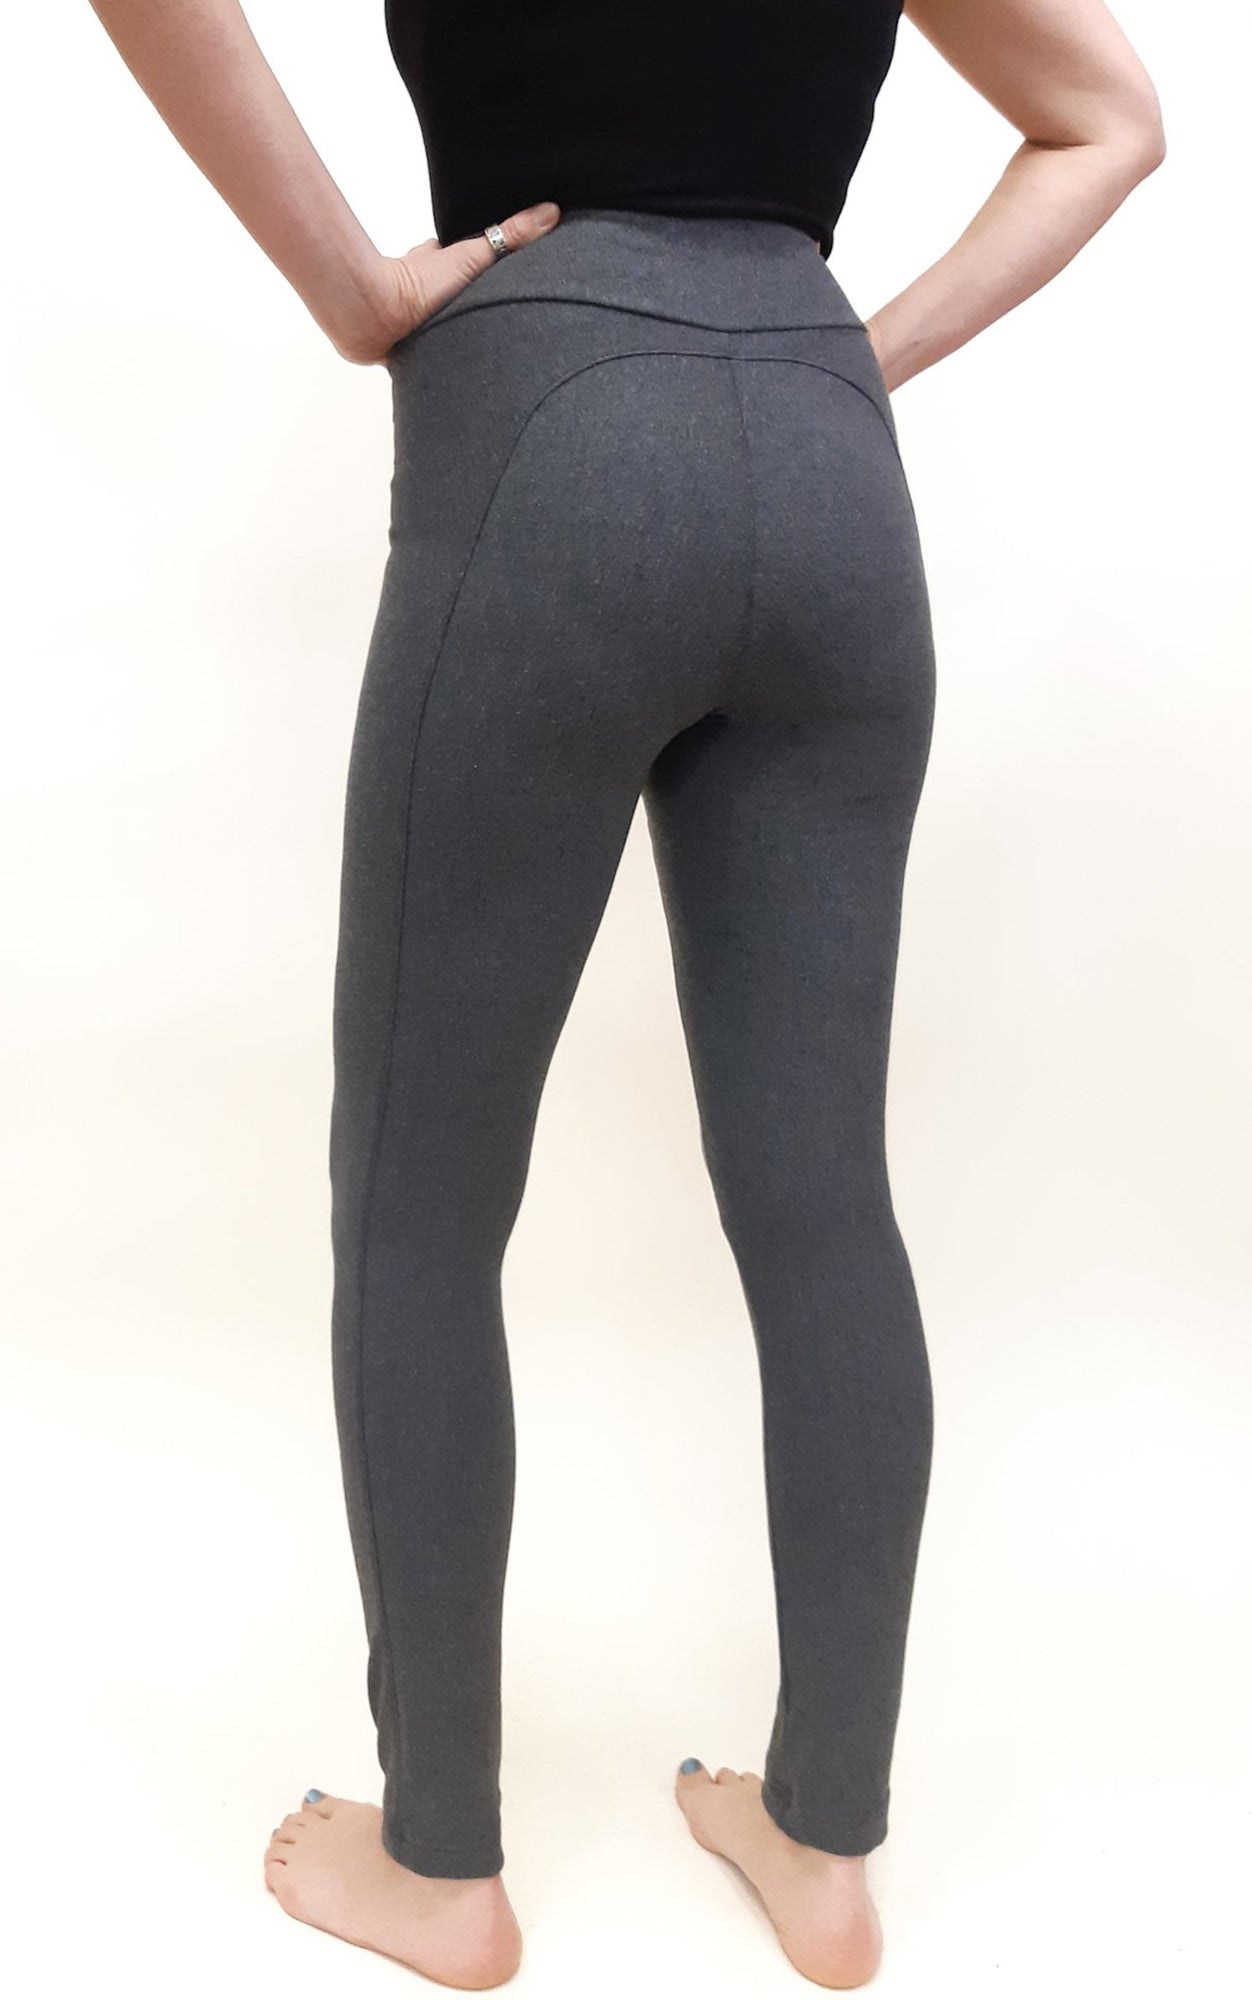 Bamboo Terry Leggings Riding Tights Charcoal